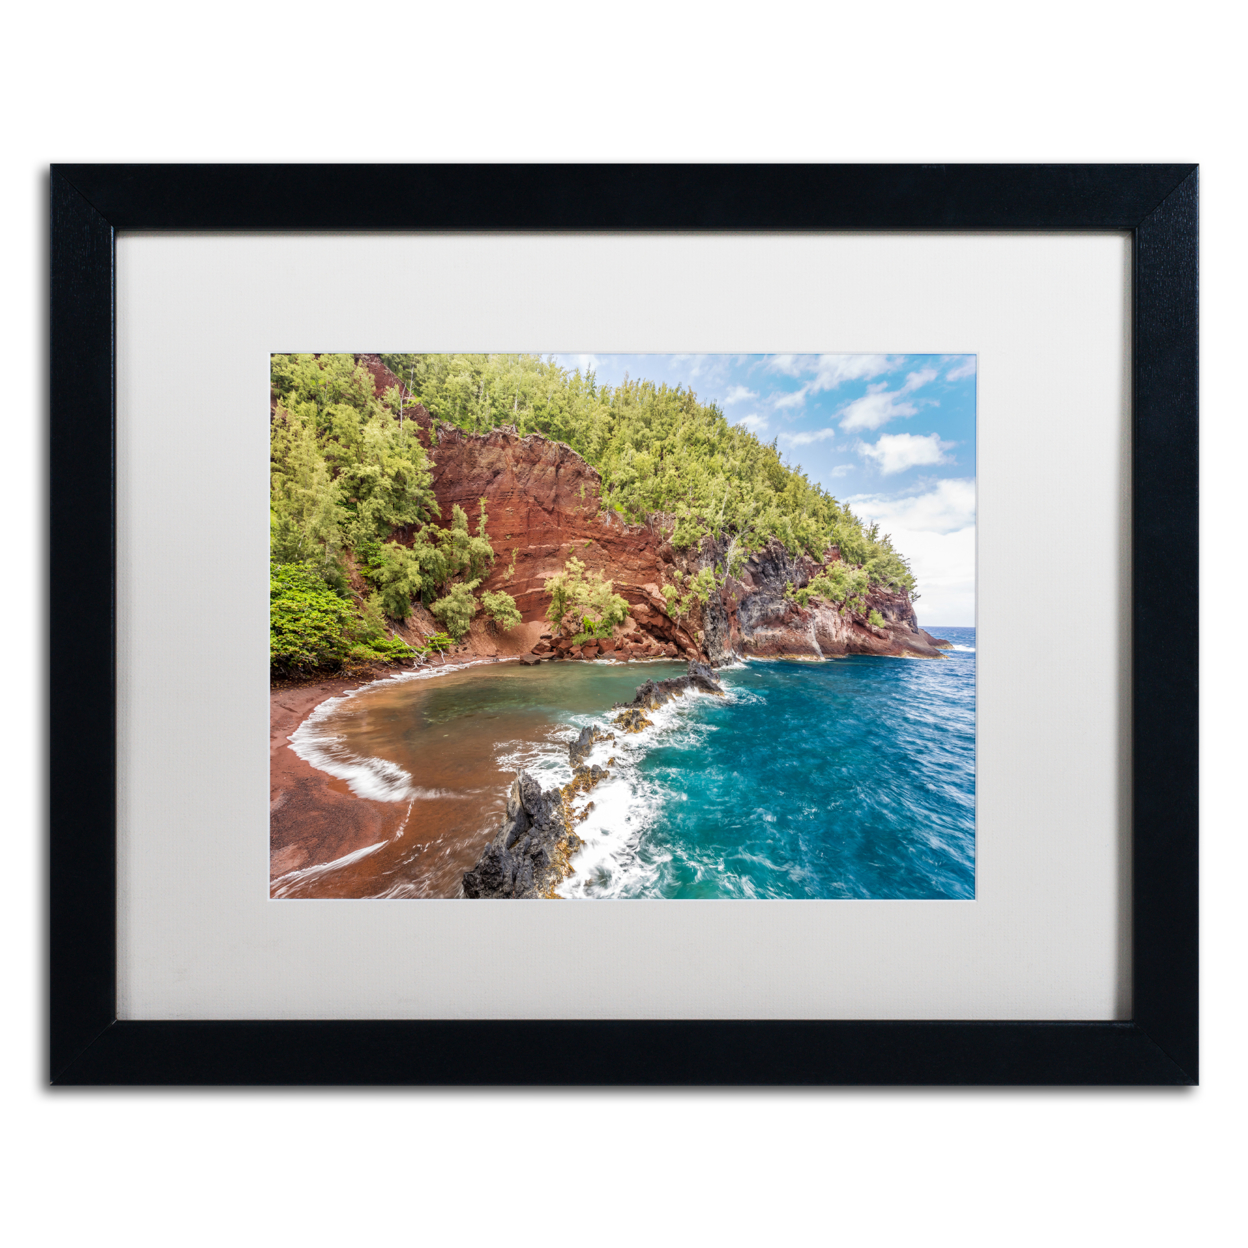 Pierre Leclerc 'Red Sand Beach Maui' Black Wooden Framed Art 18 X 22 Inches